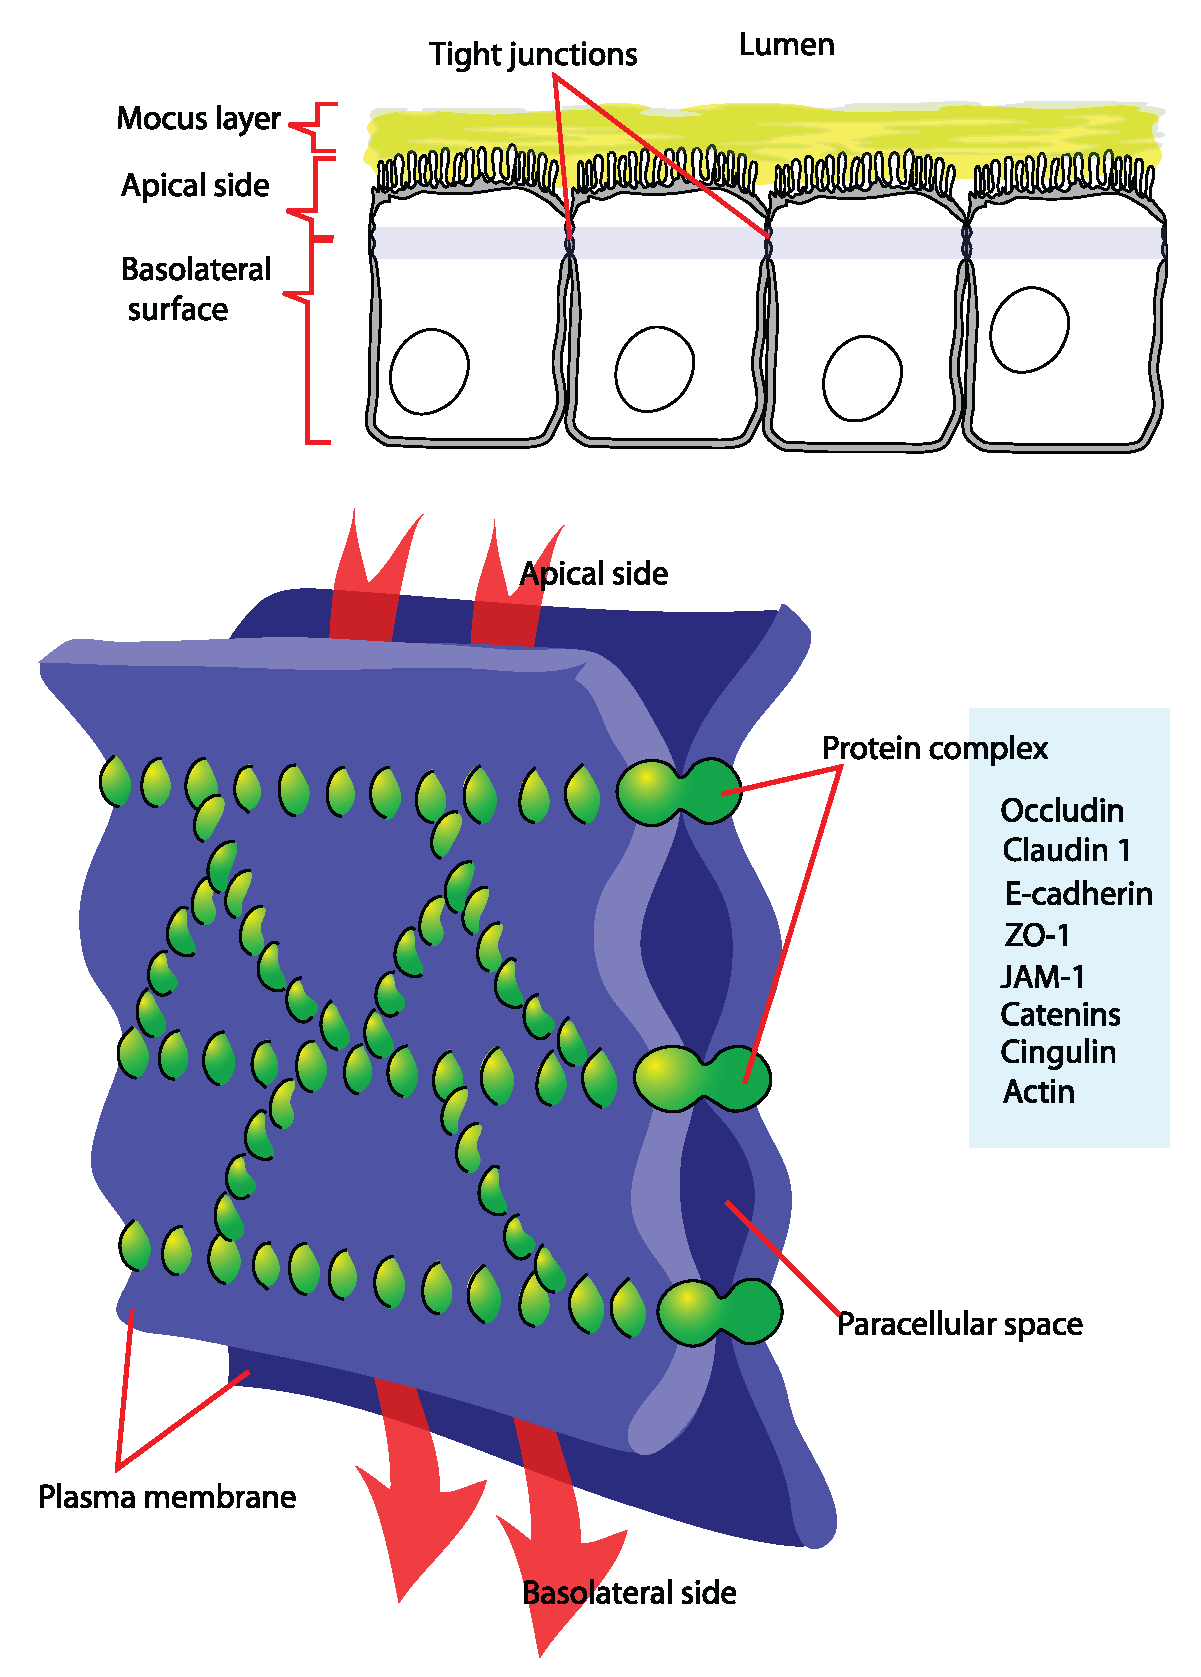 This is a color diagram of tight junction components in a plasma membrane. It shows how tight junctions form seals that create paracellular spaces throughout the plasma membrane.